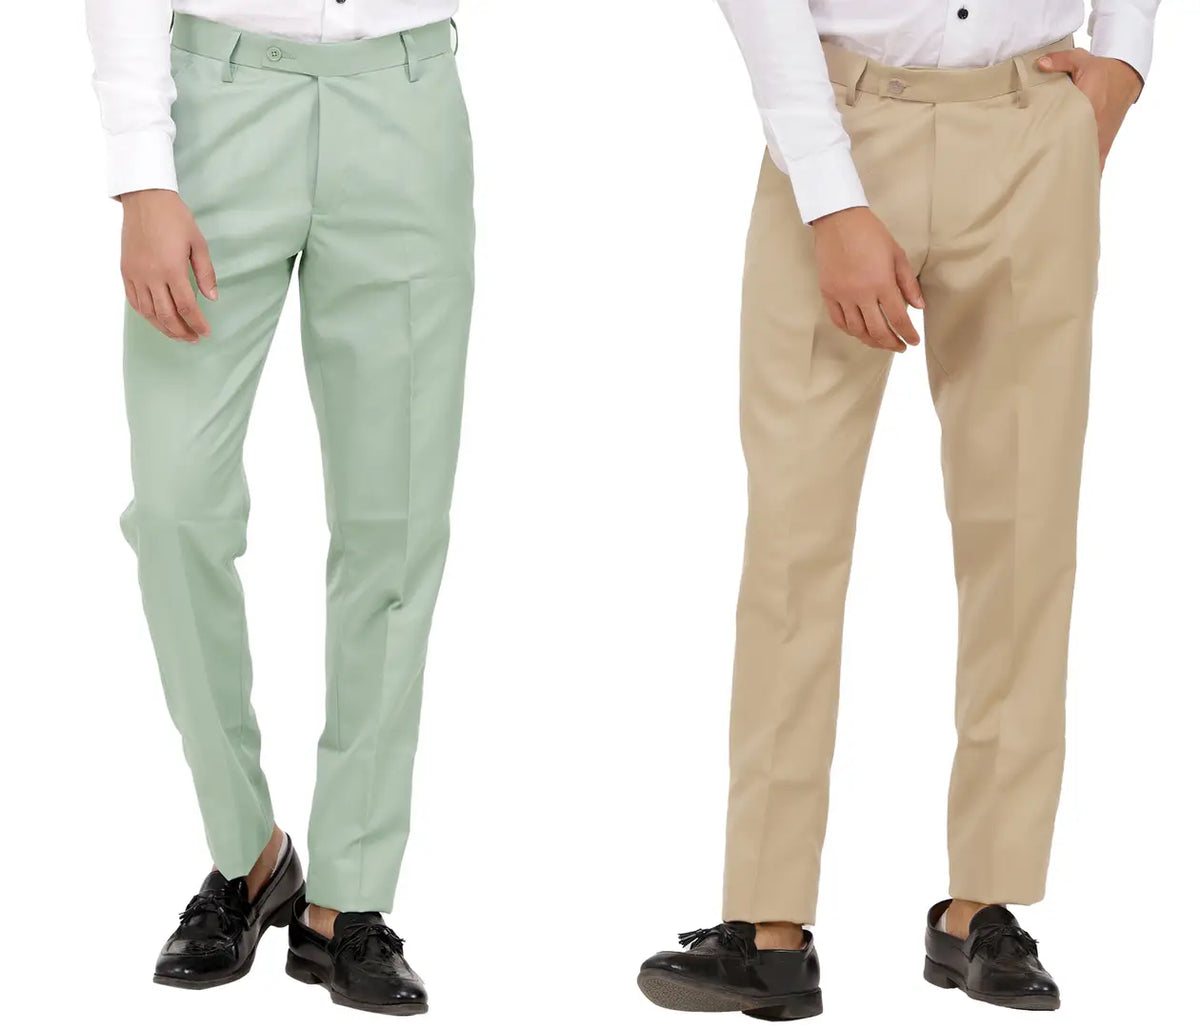 Kundan Men Poly-Viscose Blended Olive Green and Beige Formal Trousers ( Pack of 2 Trousers )